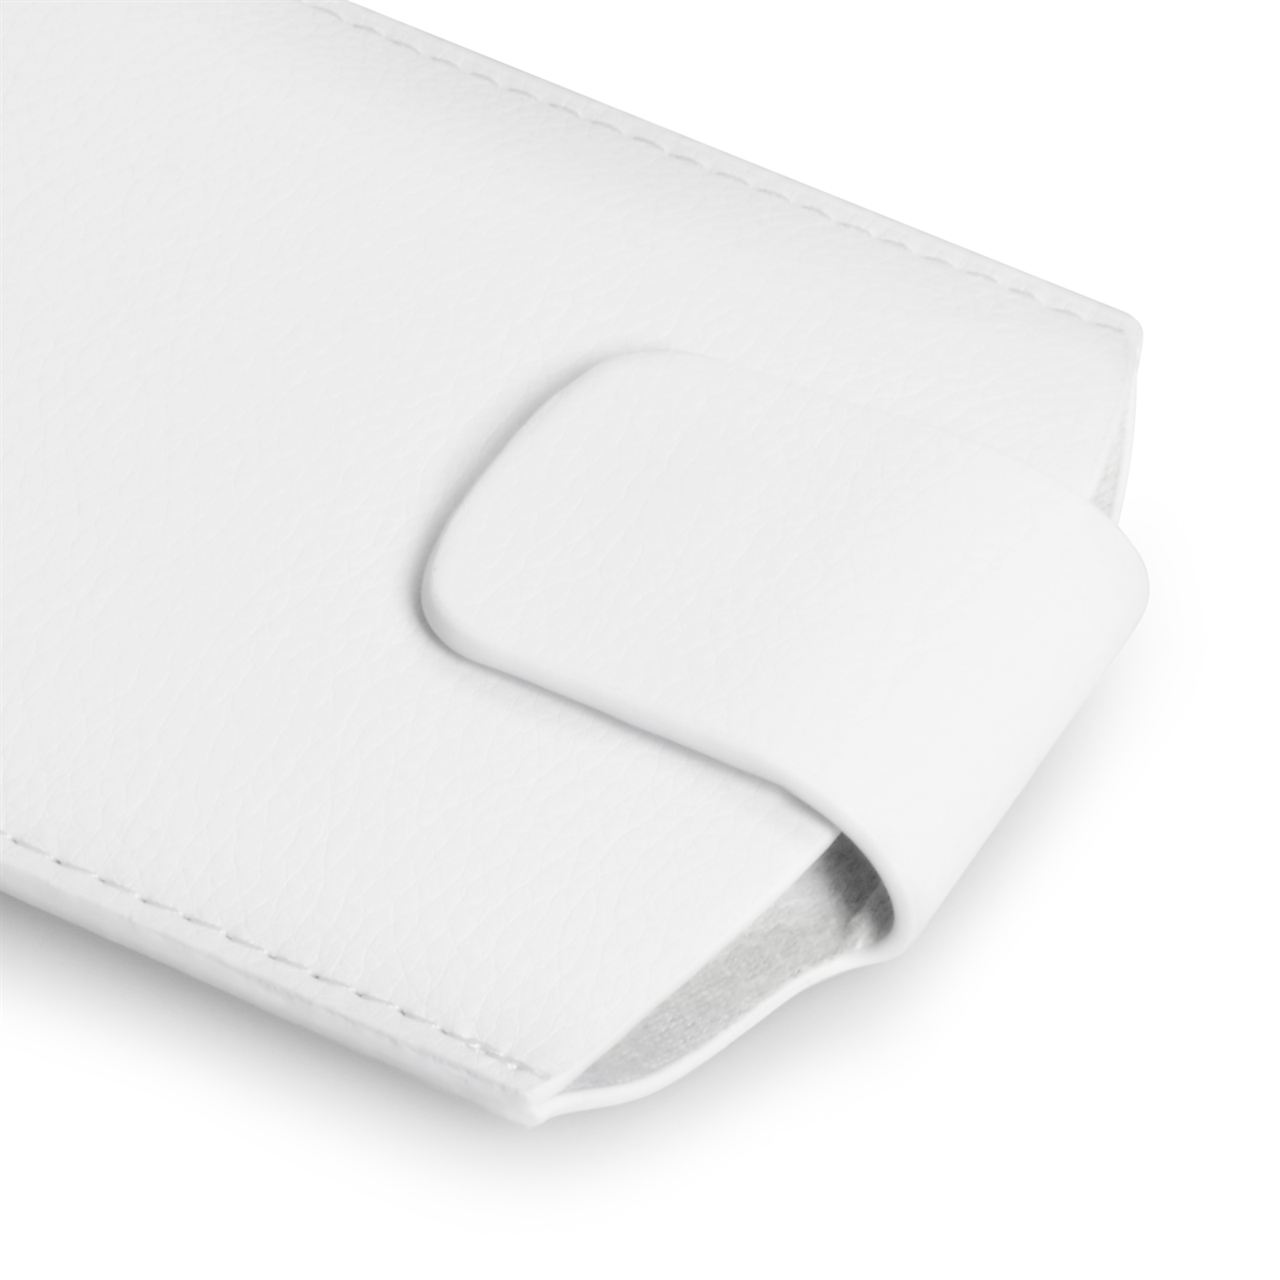 Caseflex Large Textured Faux Leather Phone Pouch - White